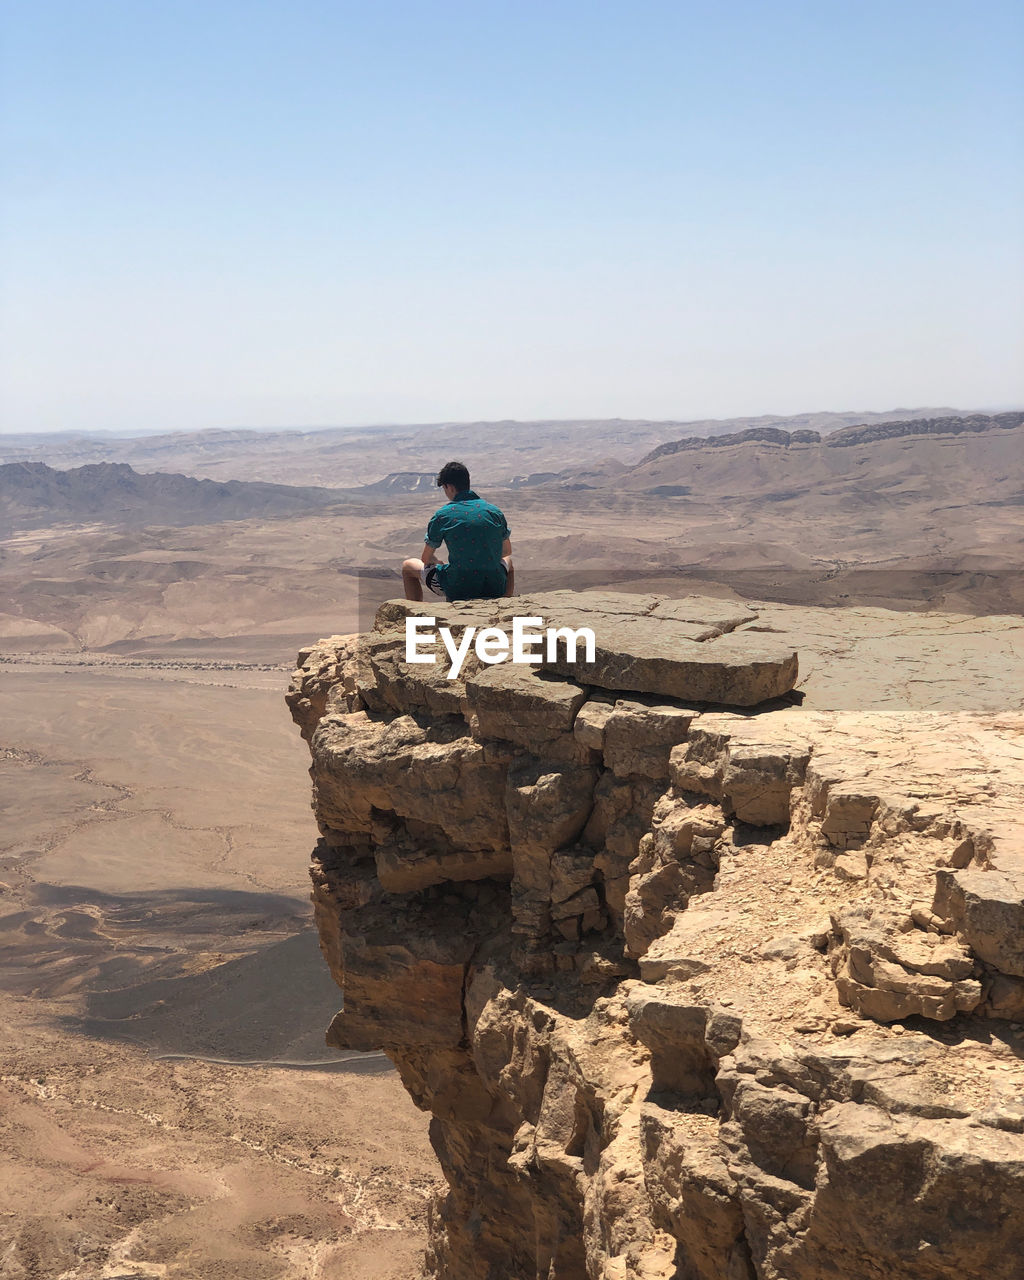 REAR VIEW OF MAN SITTING ON ROCK LOOKING AT VIEW